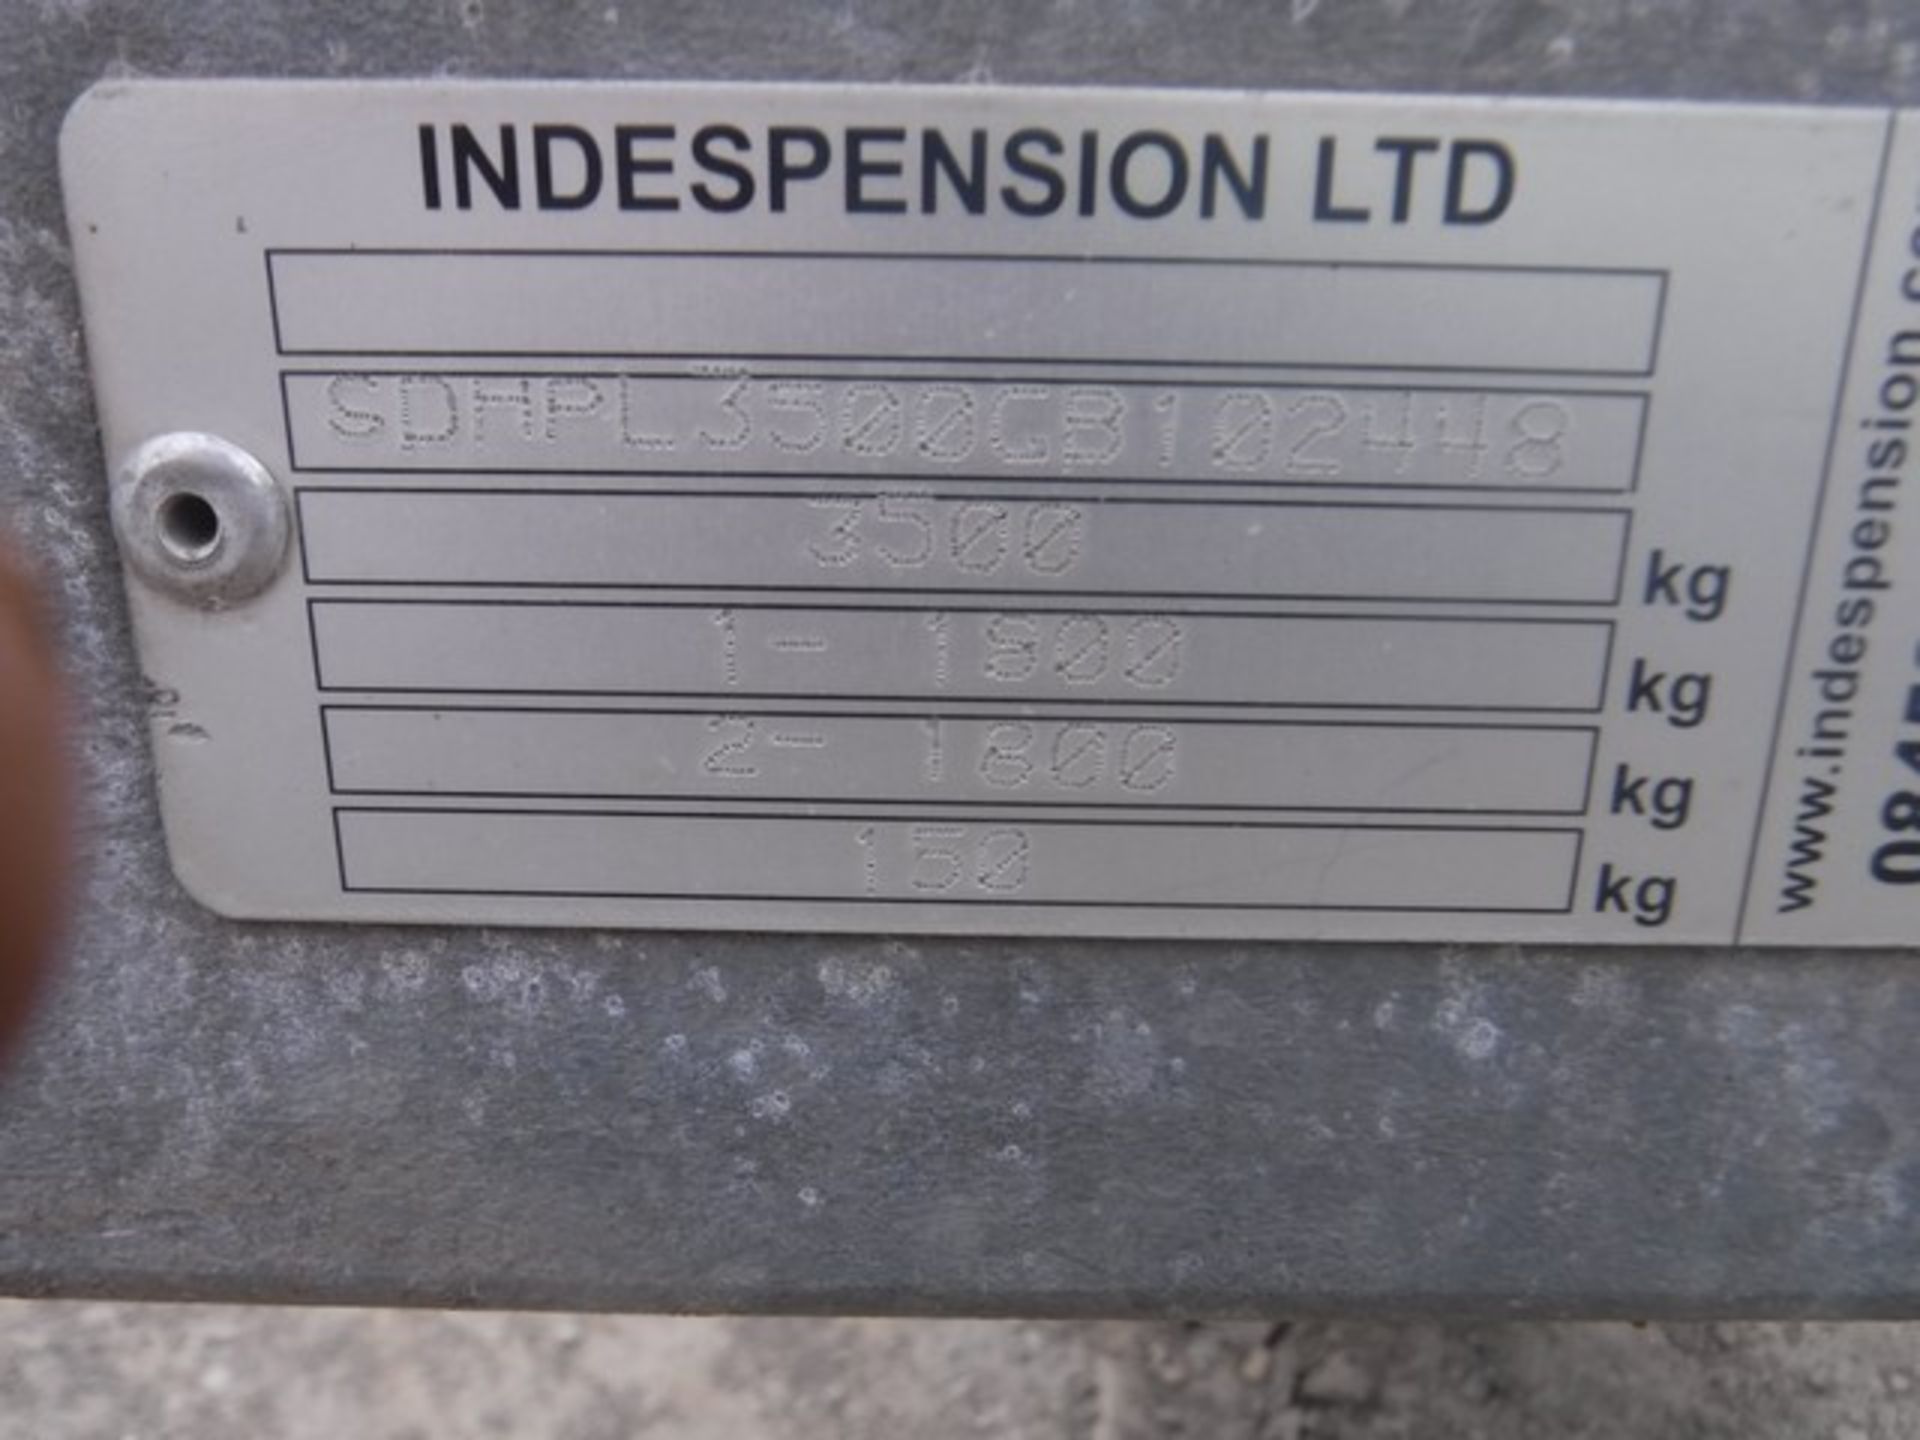 INDESPENSION 12&#39; X 6&#39; twin axle plant trailer c/w steel ramps. Asset No P830006. - Image 3 of 4